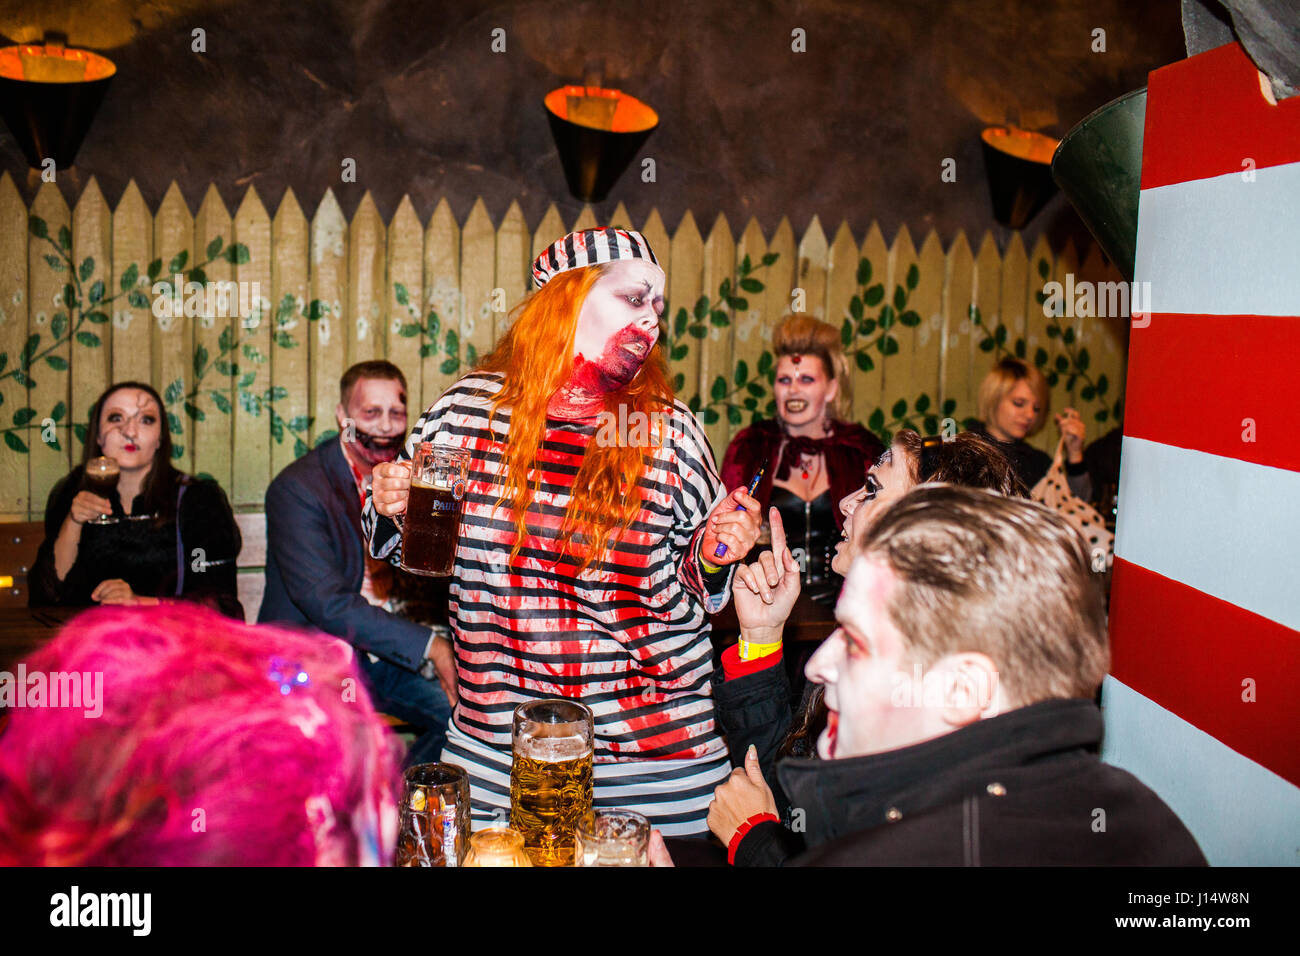 An escaped prisoner has turned into a bloody and beer drinker zombie. Denmark, Copenhagen 19/10 2013. Stock Photo